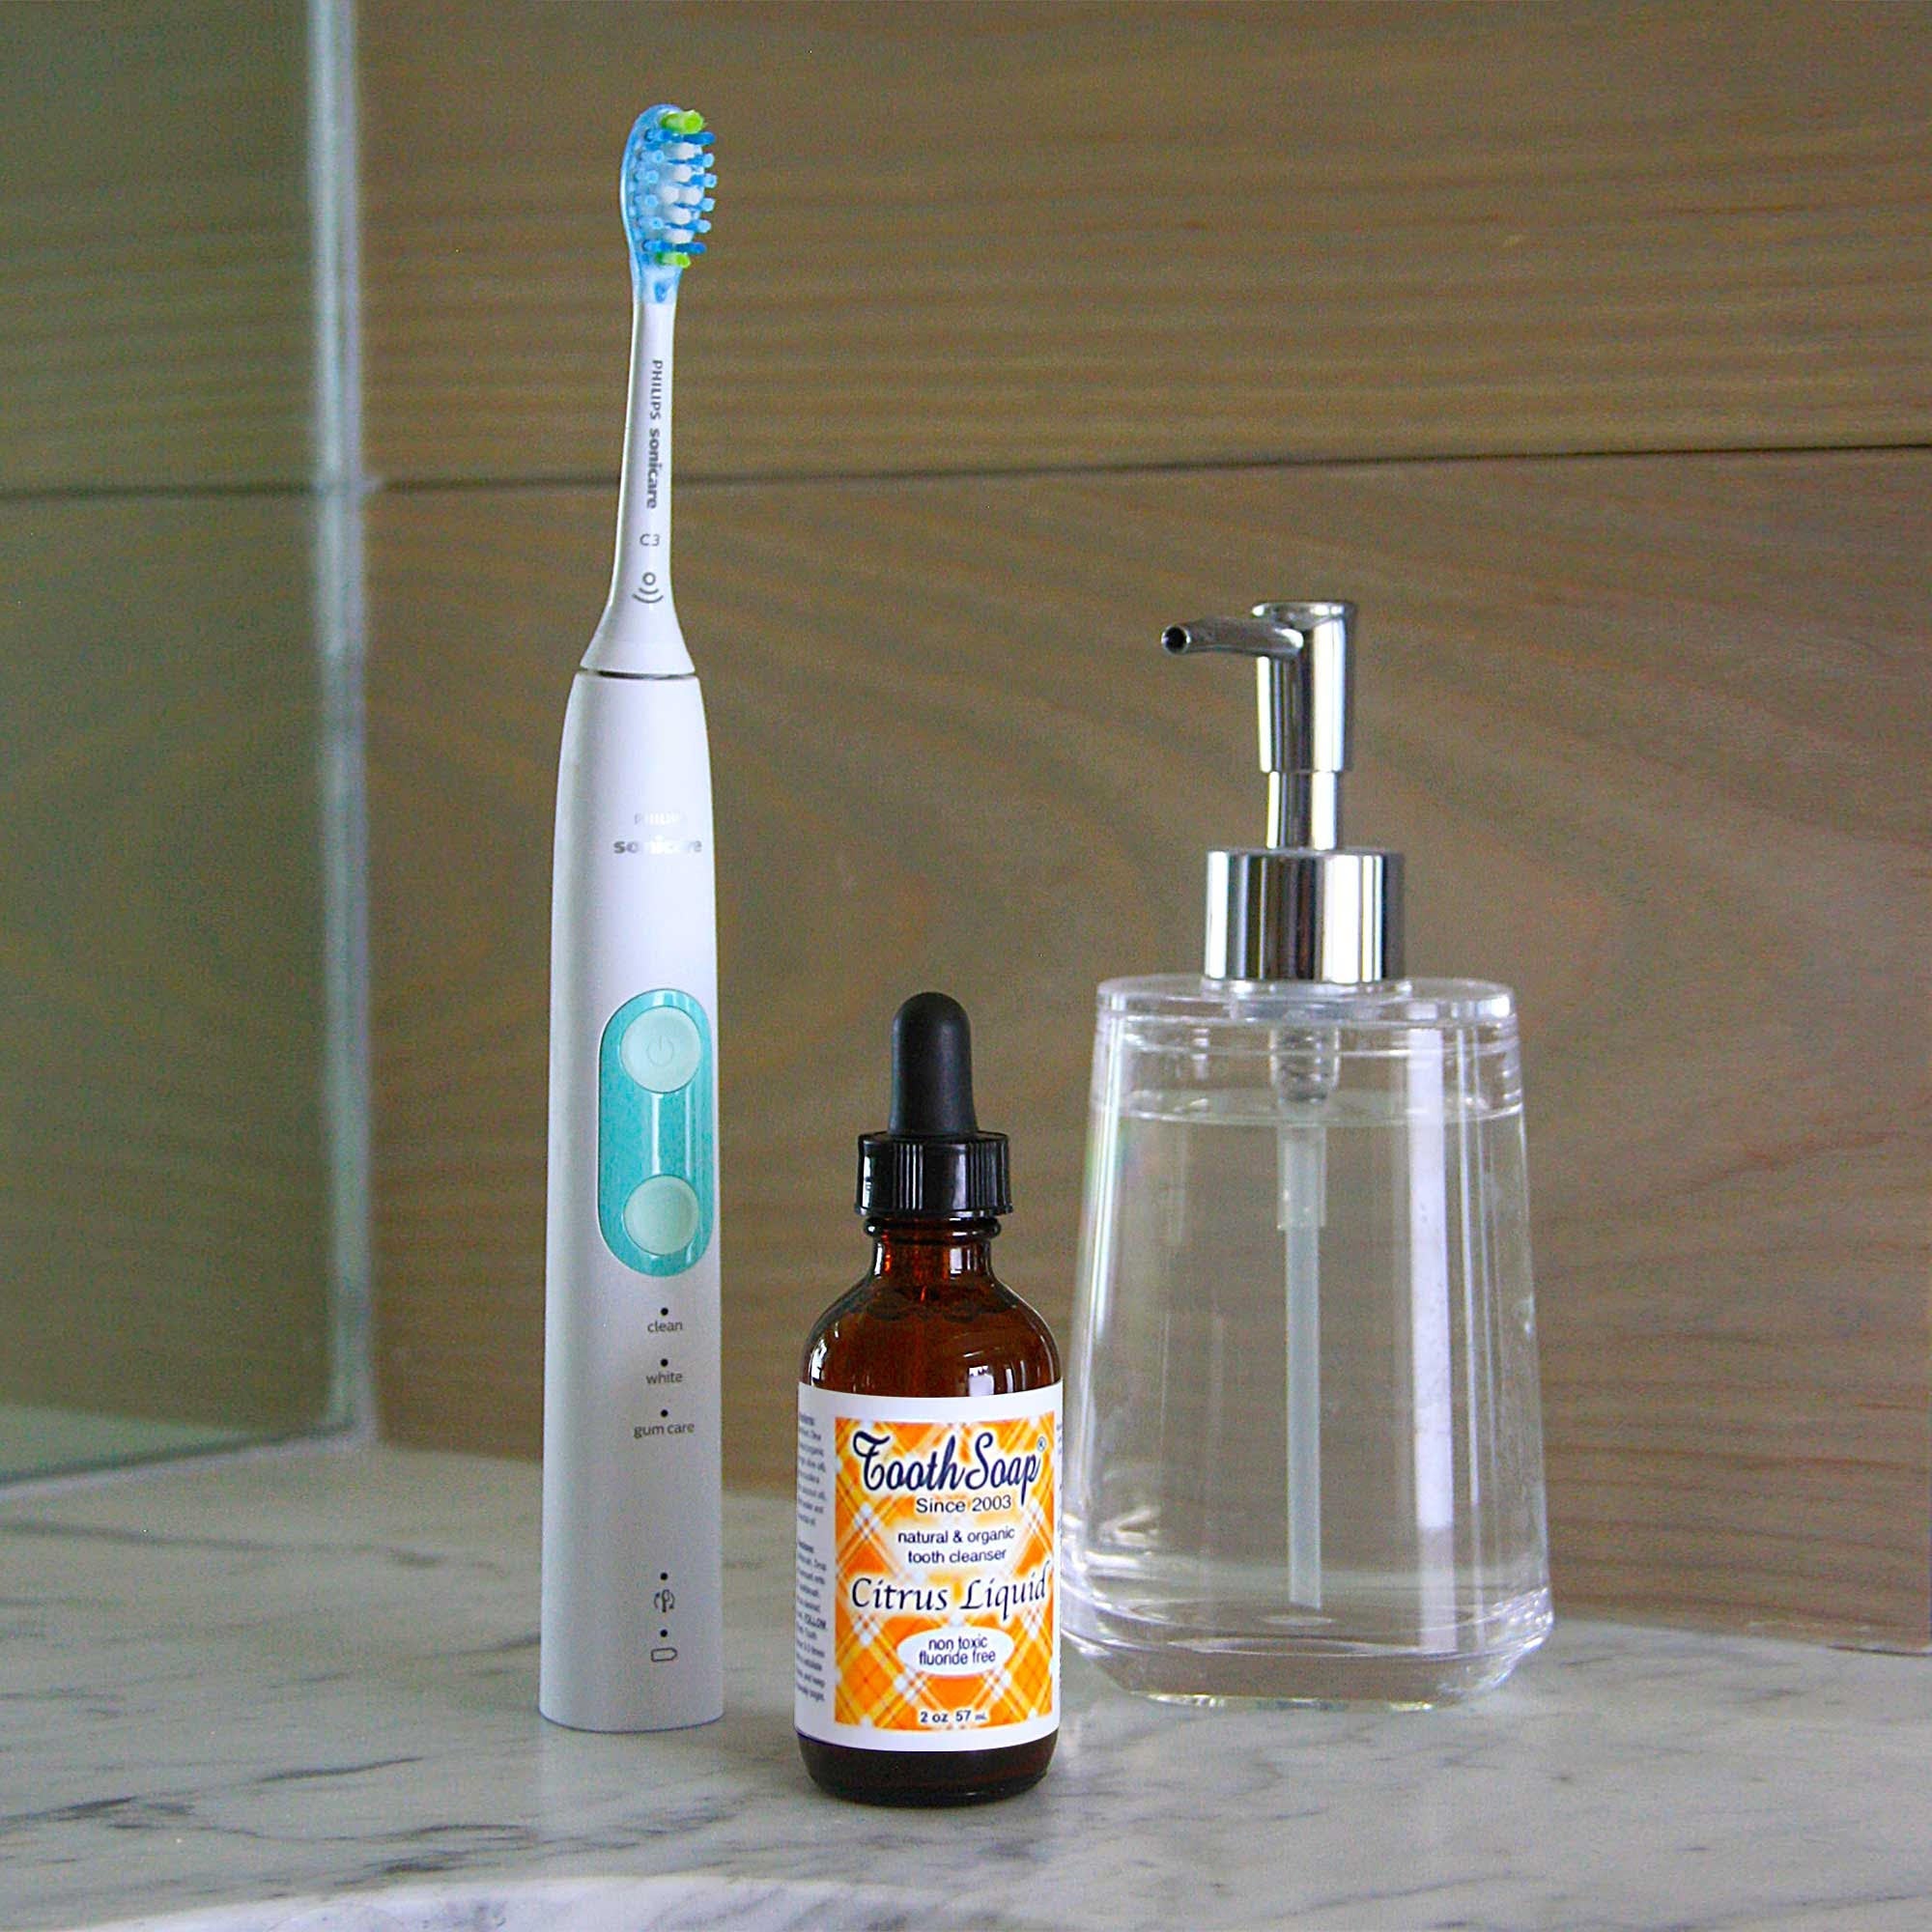 Citrus Tooth Soap white and turquoise standing electric toothbrush brown bottle with black dropper top, and orange and yellow label, clear glass dispenser